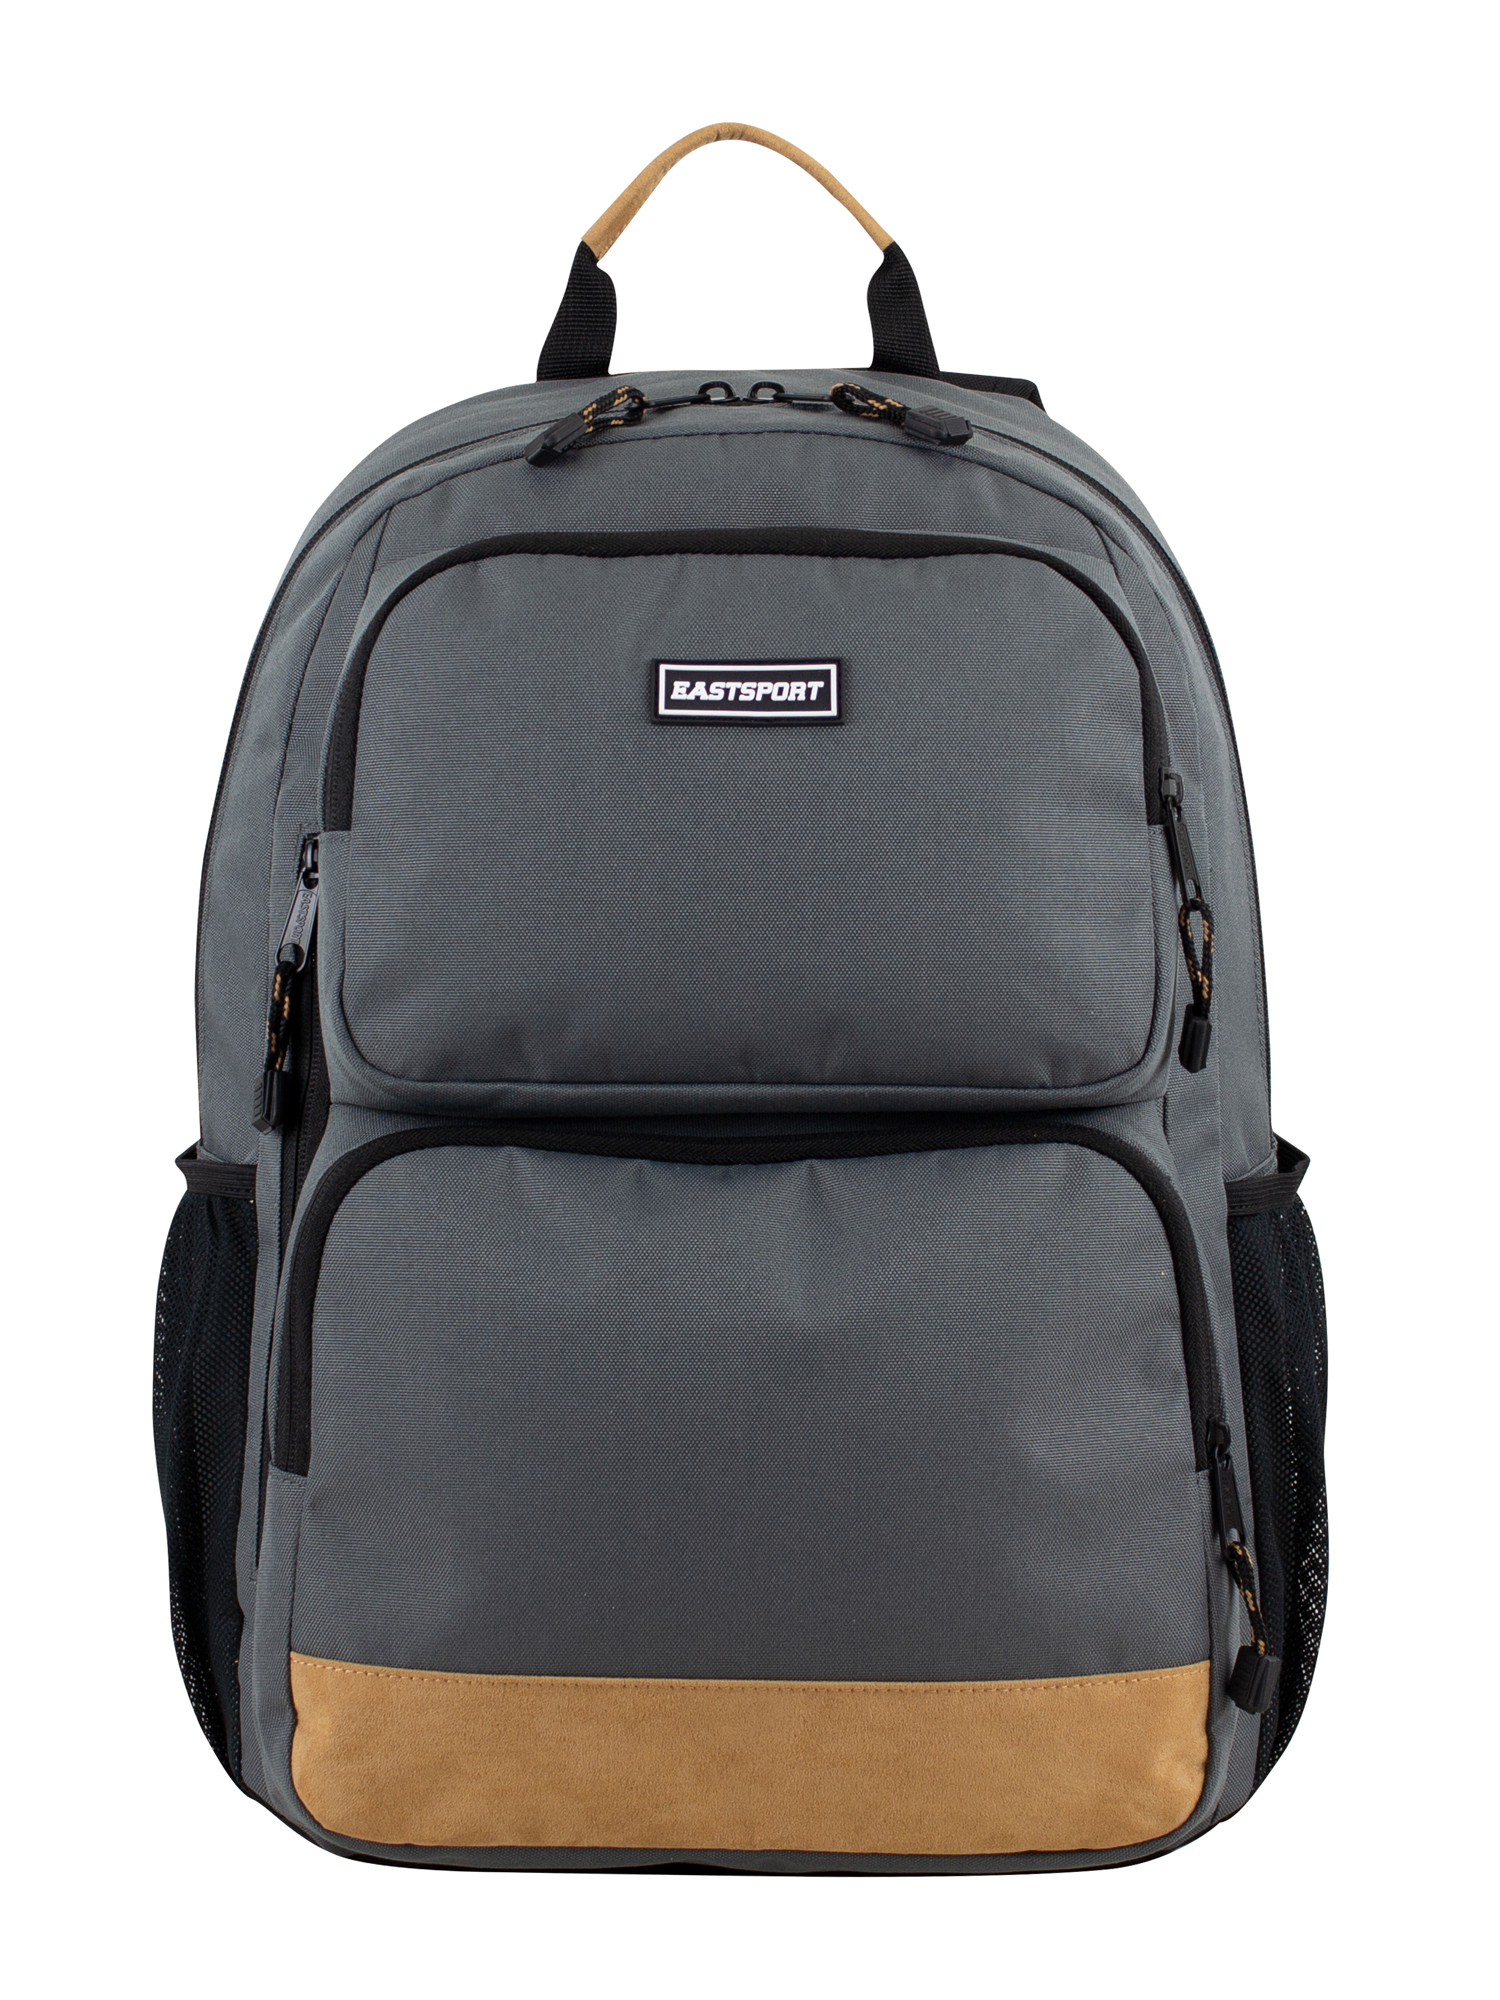 Eastsport Unisex Core Excel Backpack, Charcoal - image 5 of 7